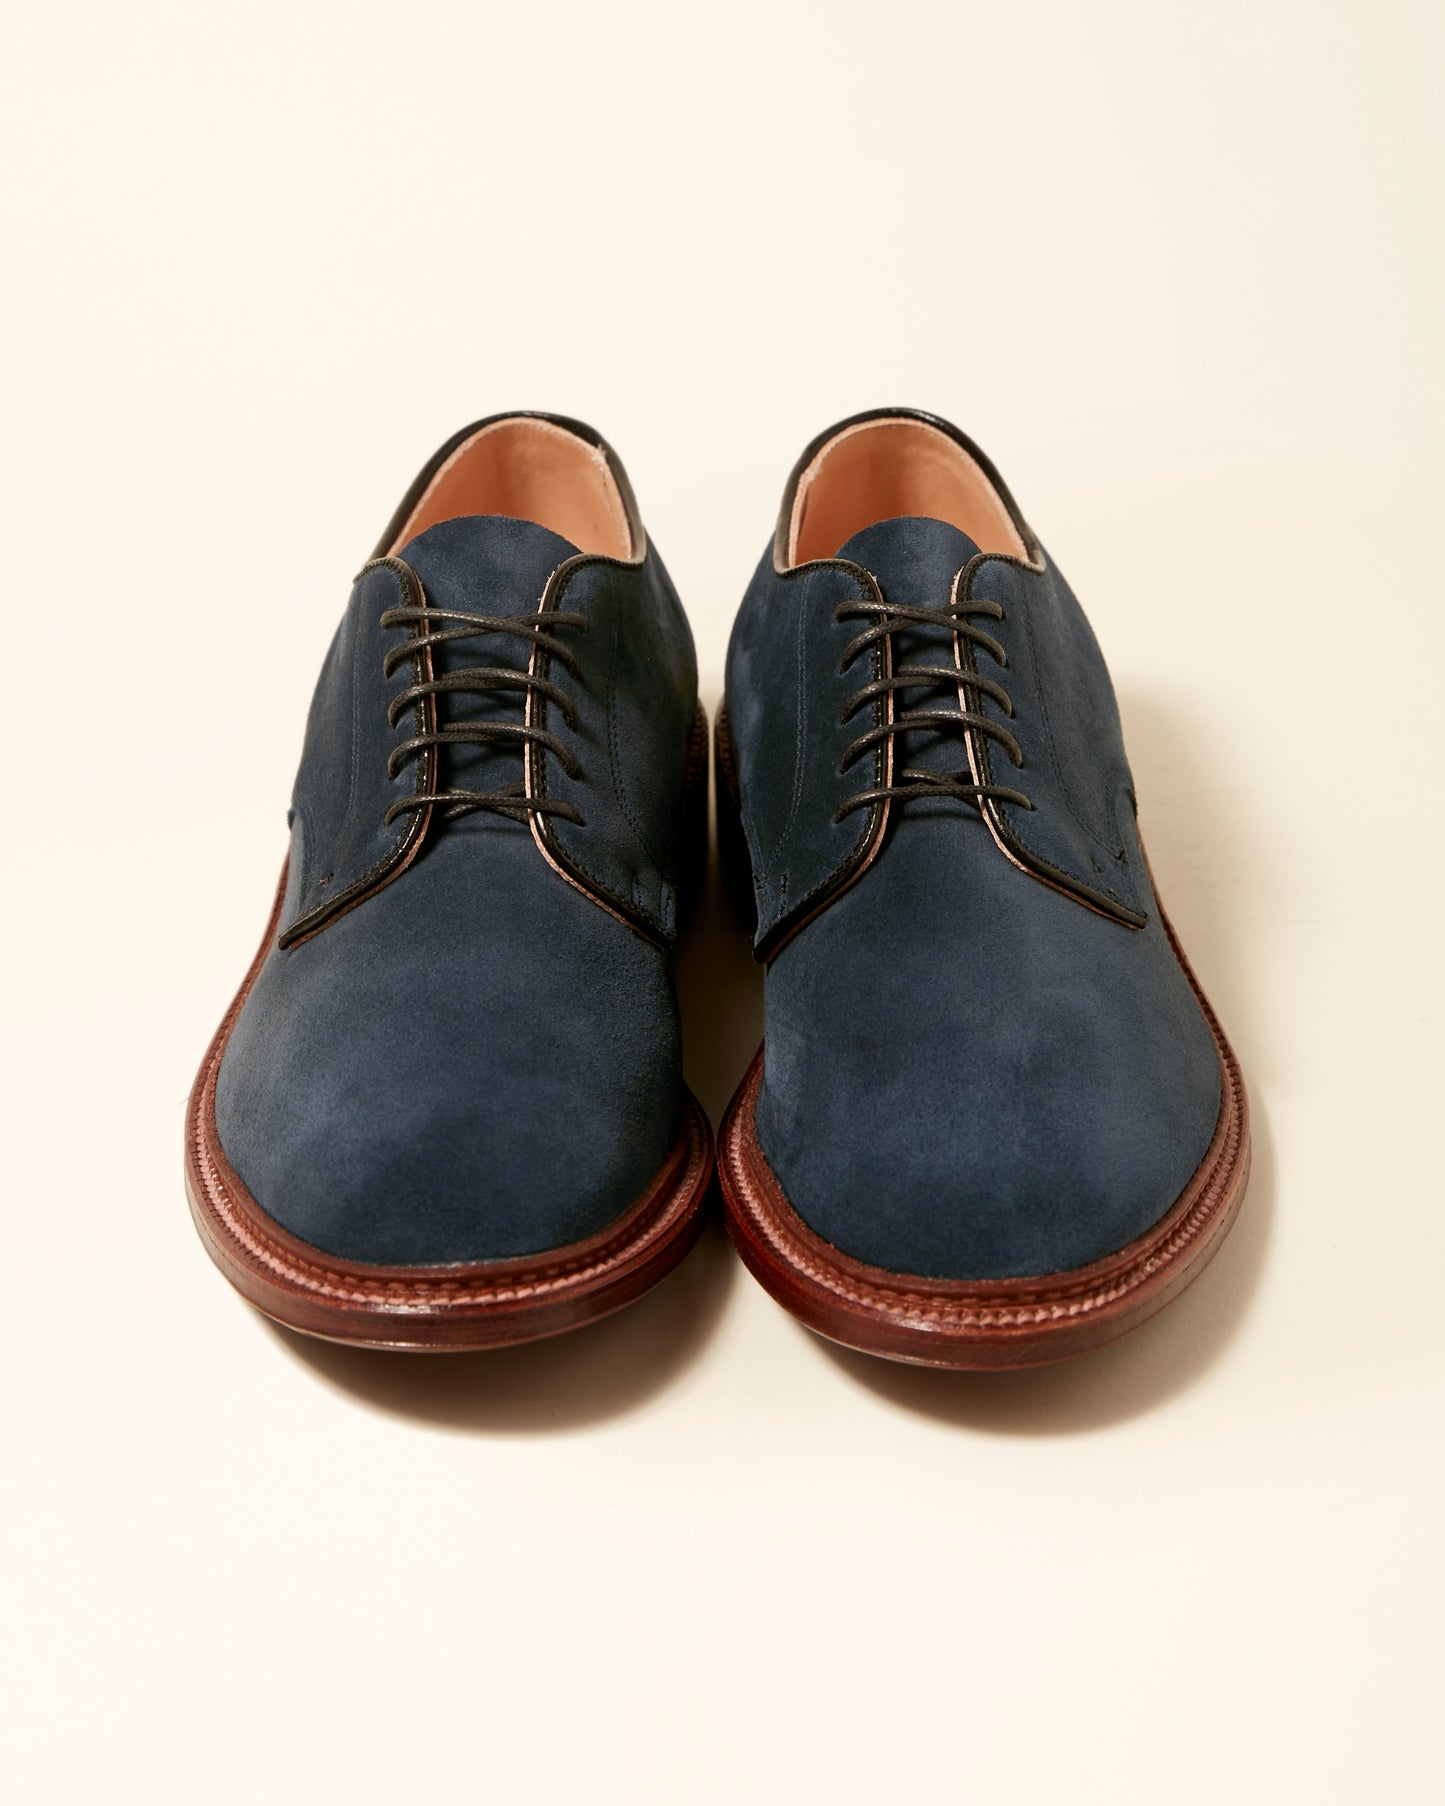 29331F Unlined Blucher in Navy Suede, Barrie Last